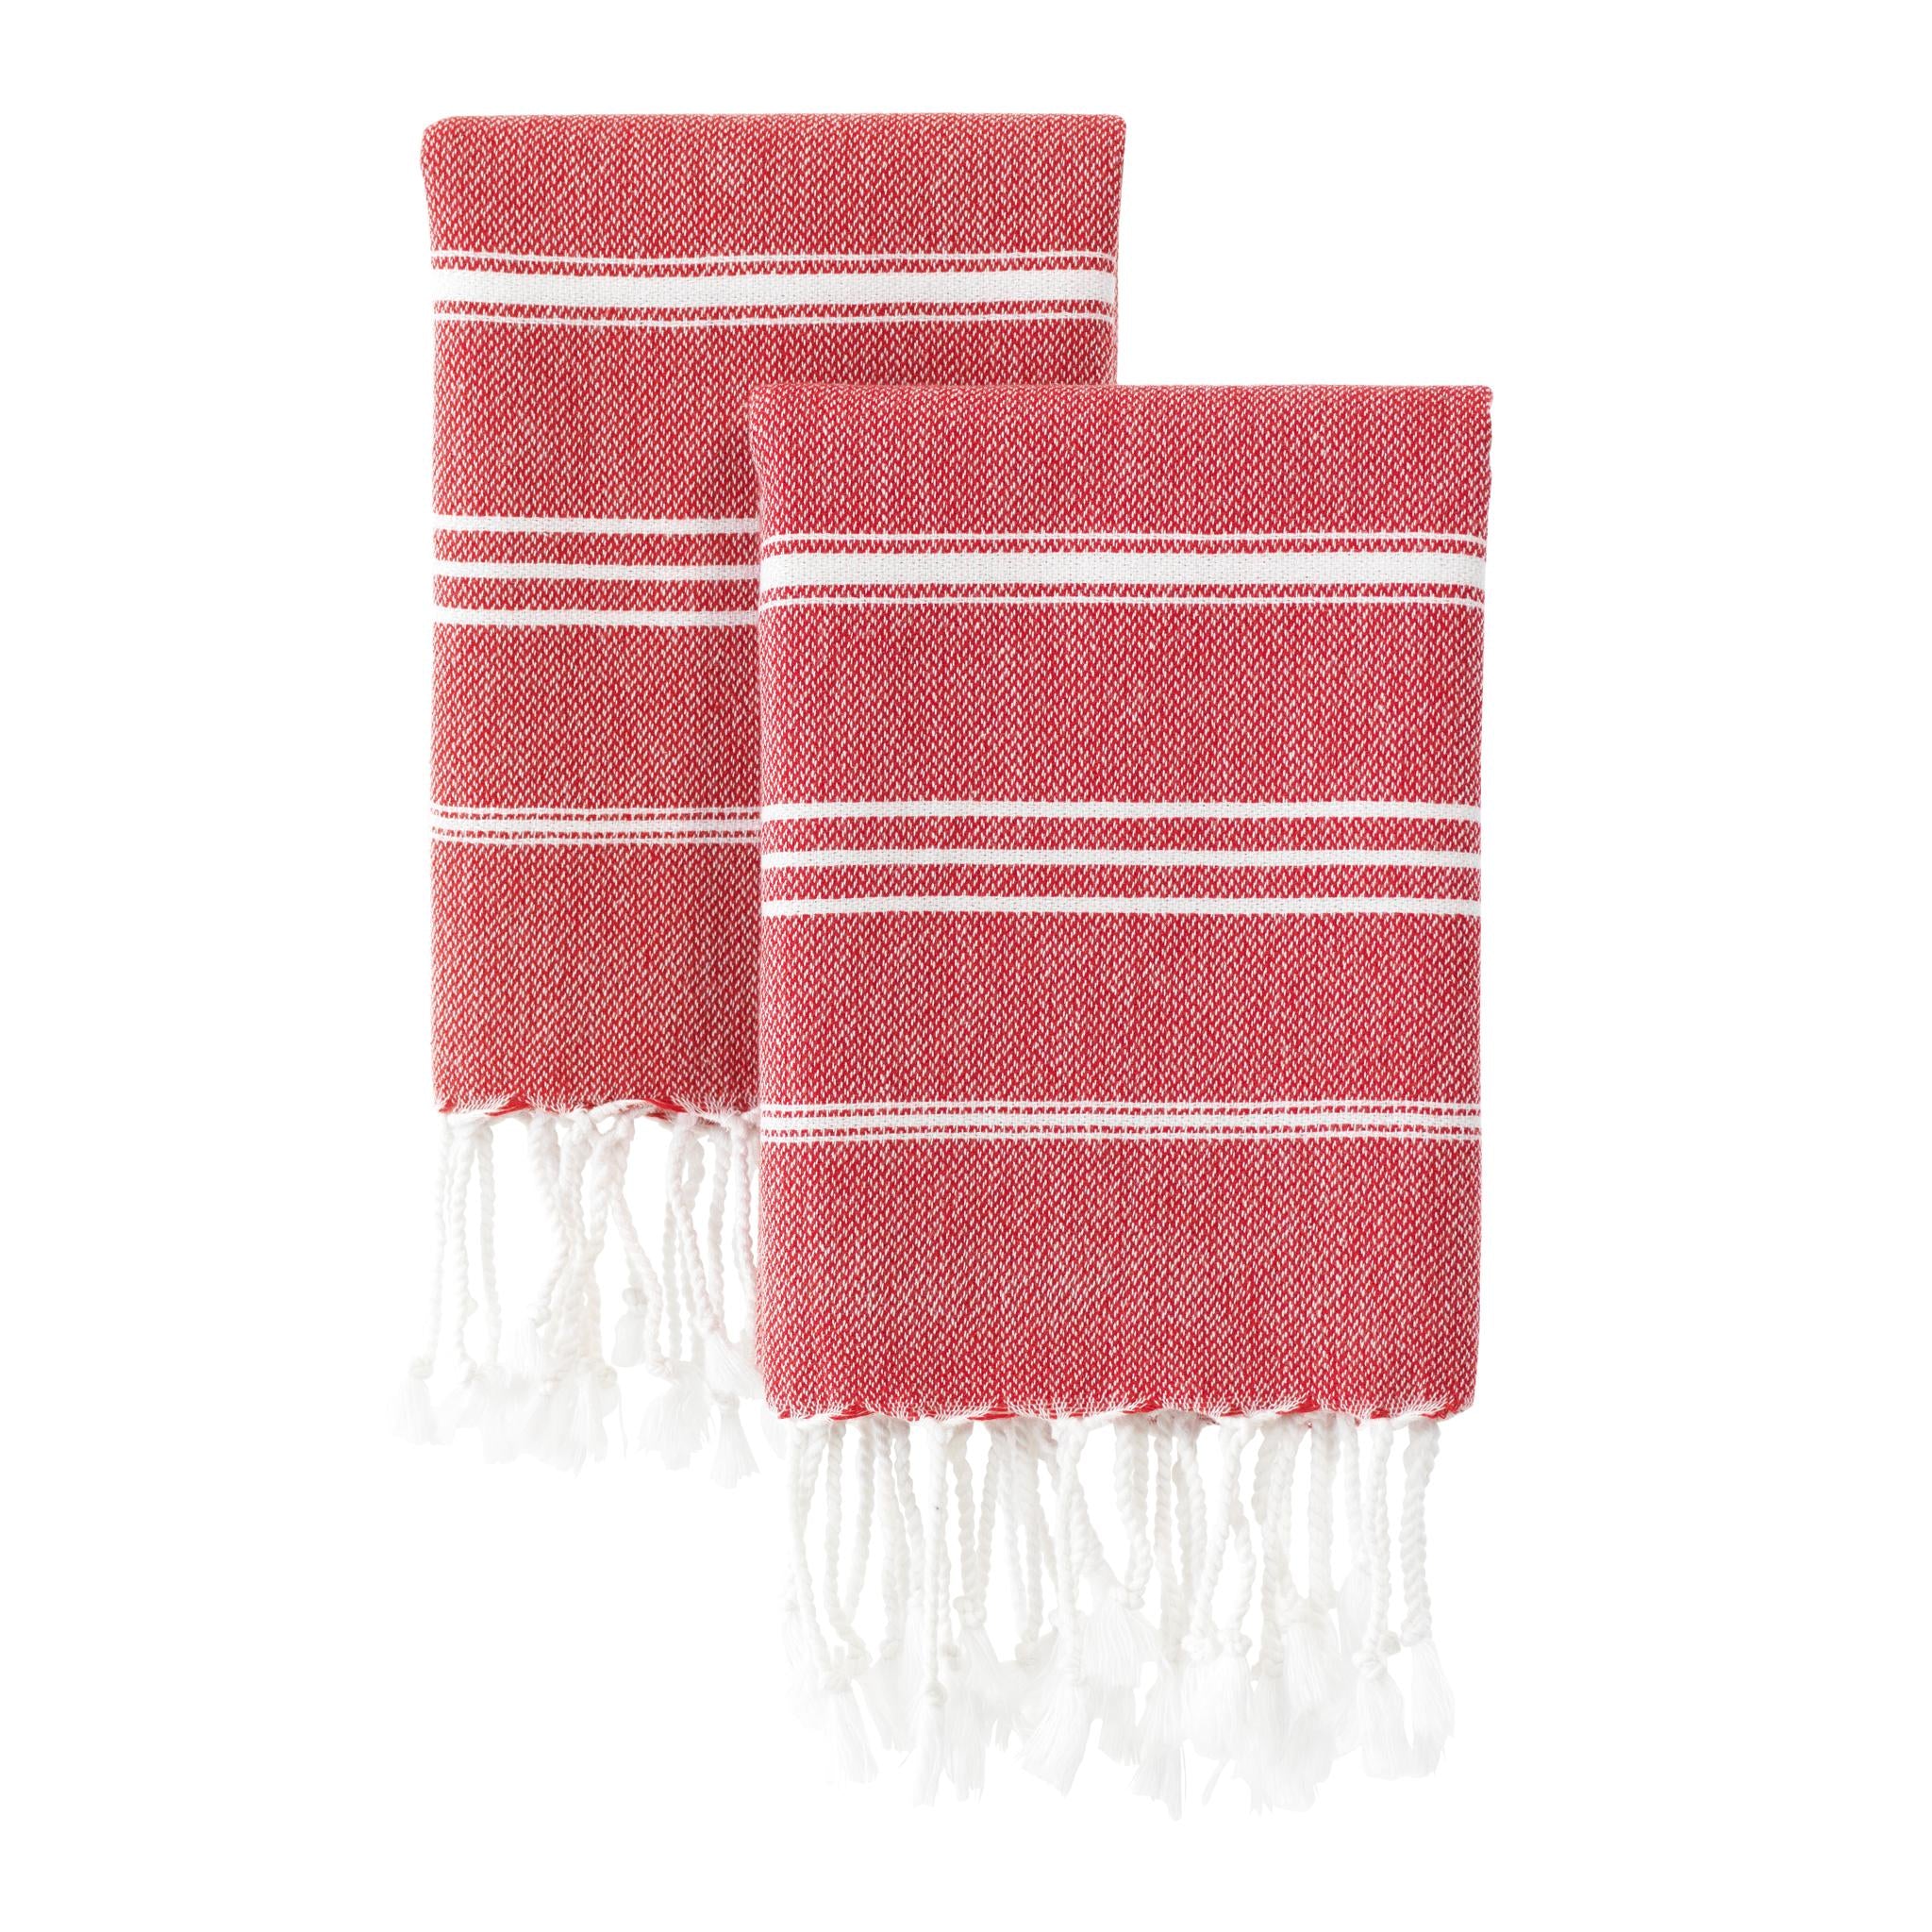 New Turkish Towel Kitchen Set of 2 Cotton Terry Holiday Towels Red